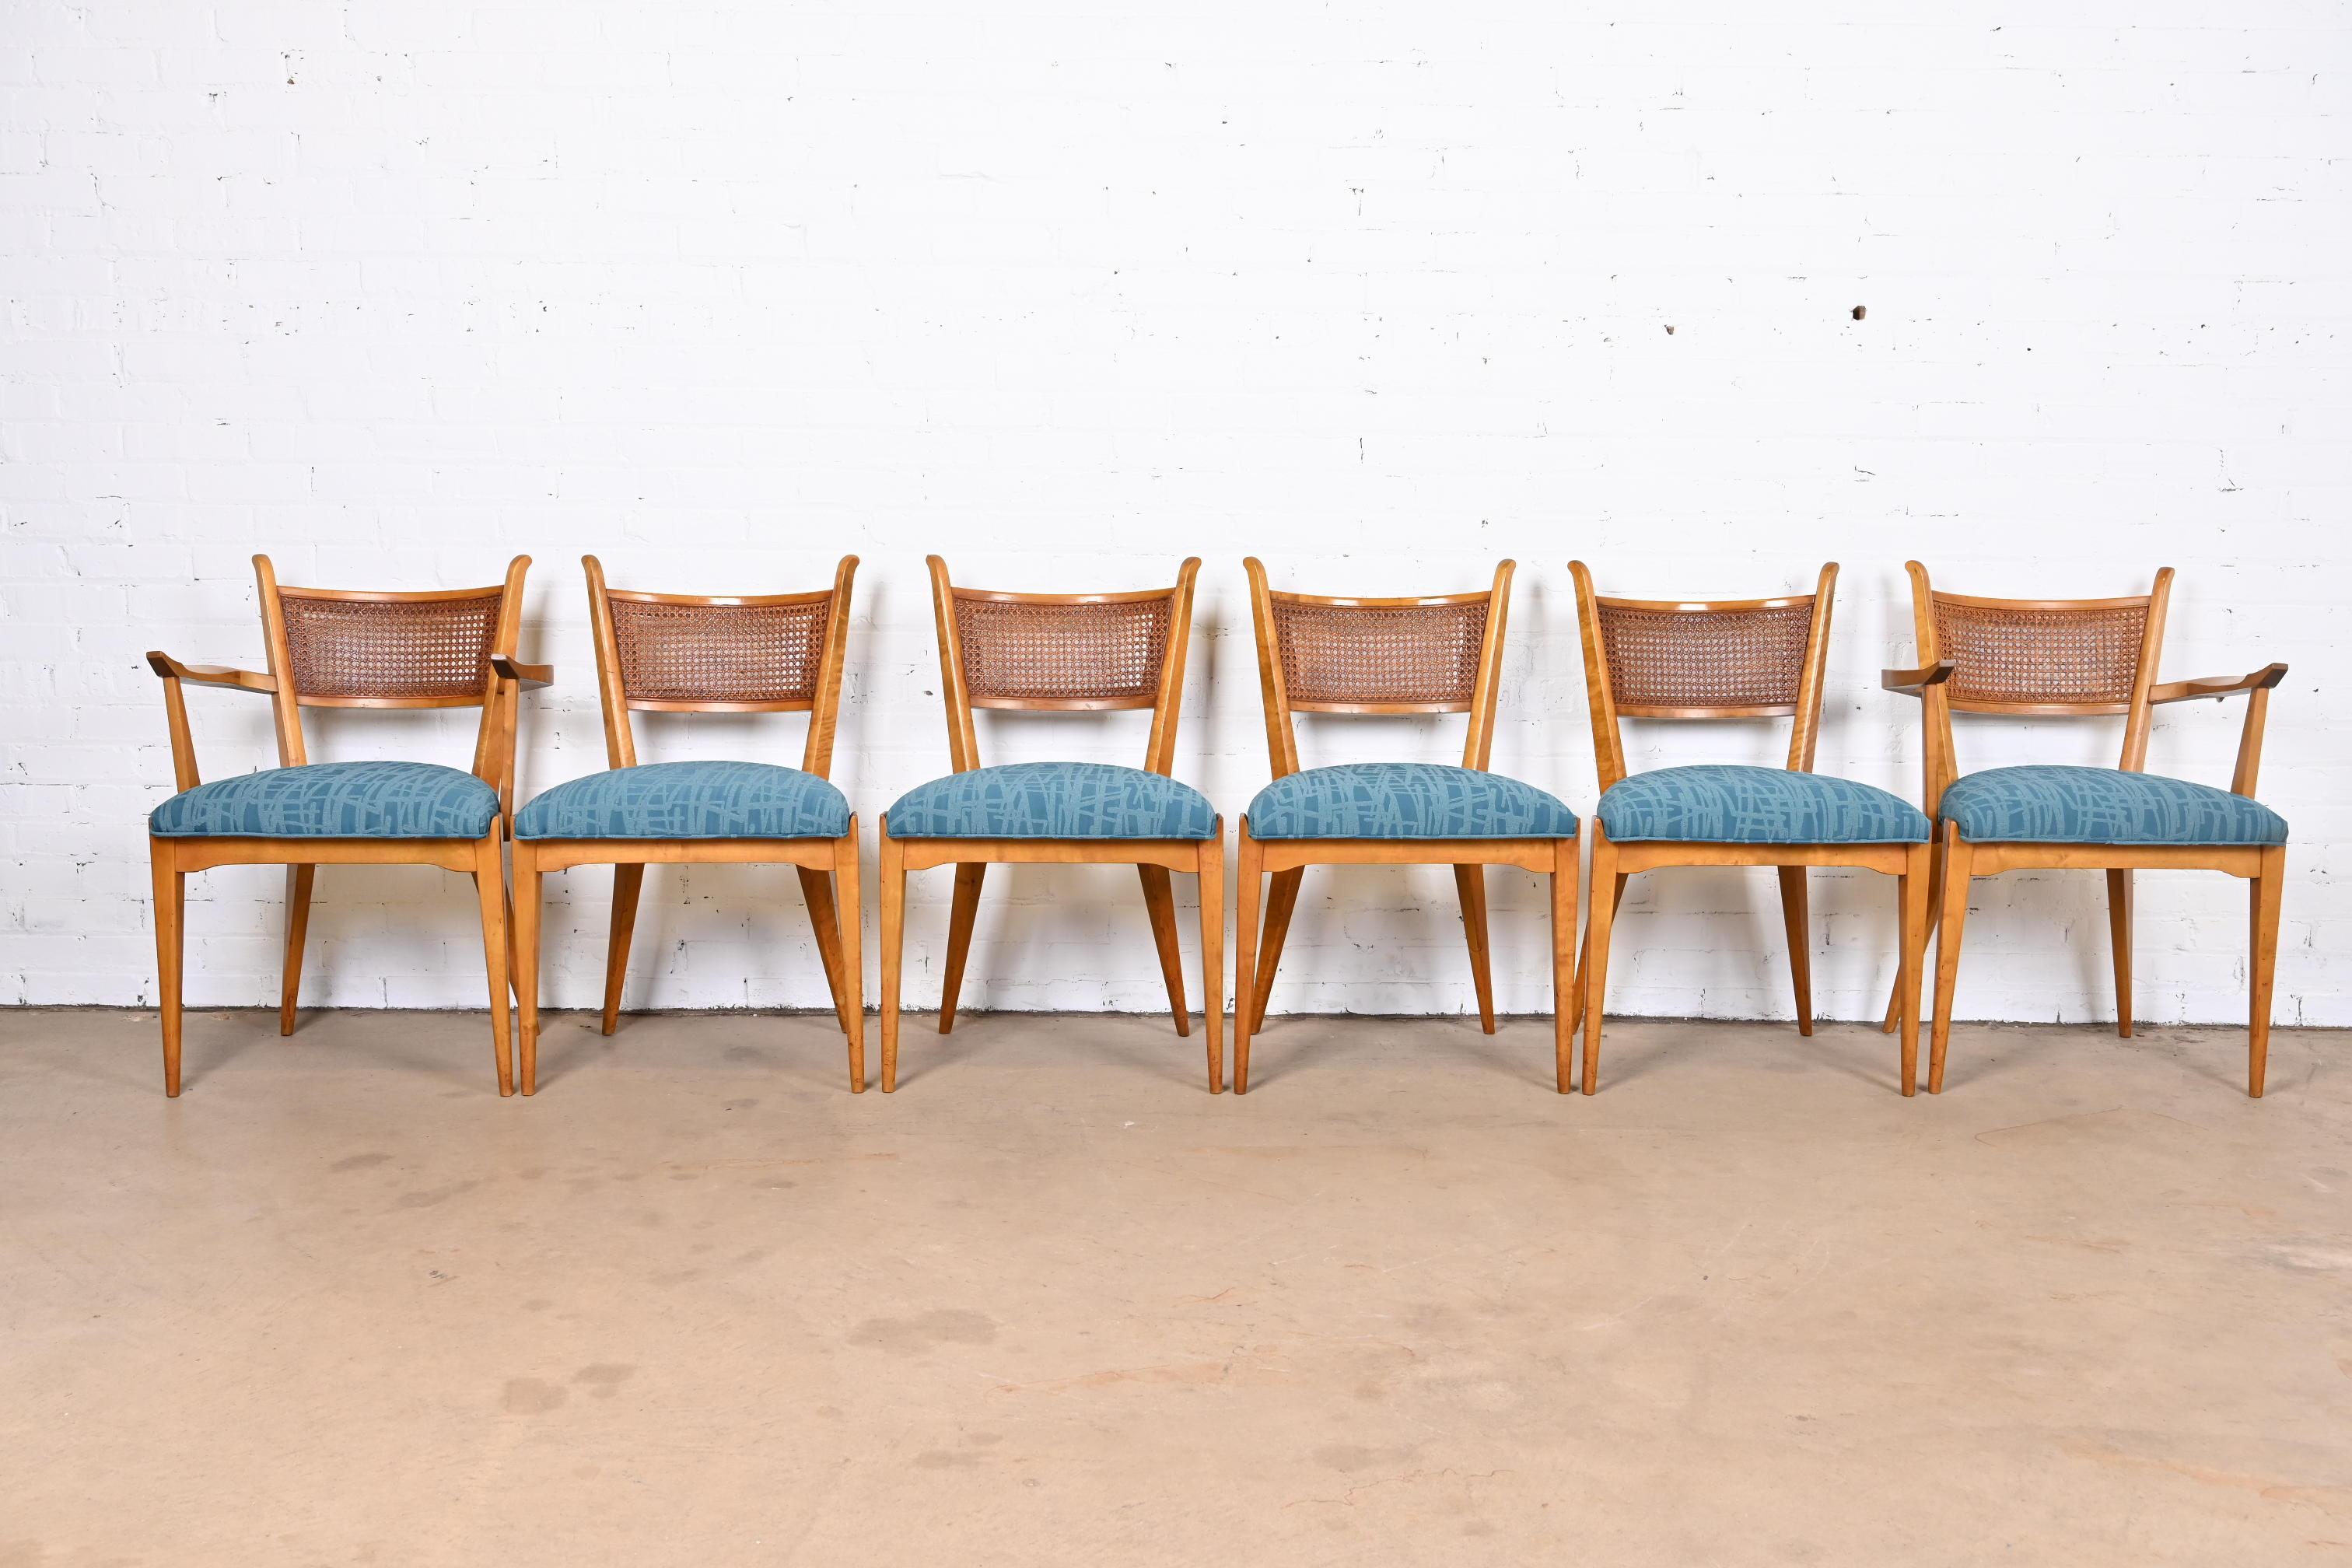 An exceptional set of six mid-century Scandinavian Modern dining chairs.

By Edmond J. Spence

Sweden, 1950s

Solid sculpted maple frames, with caned seat backs and upholstered seats.

Measures:
Side chairs - 20.75